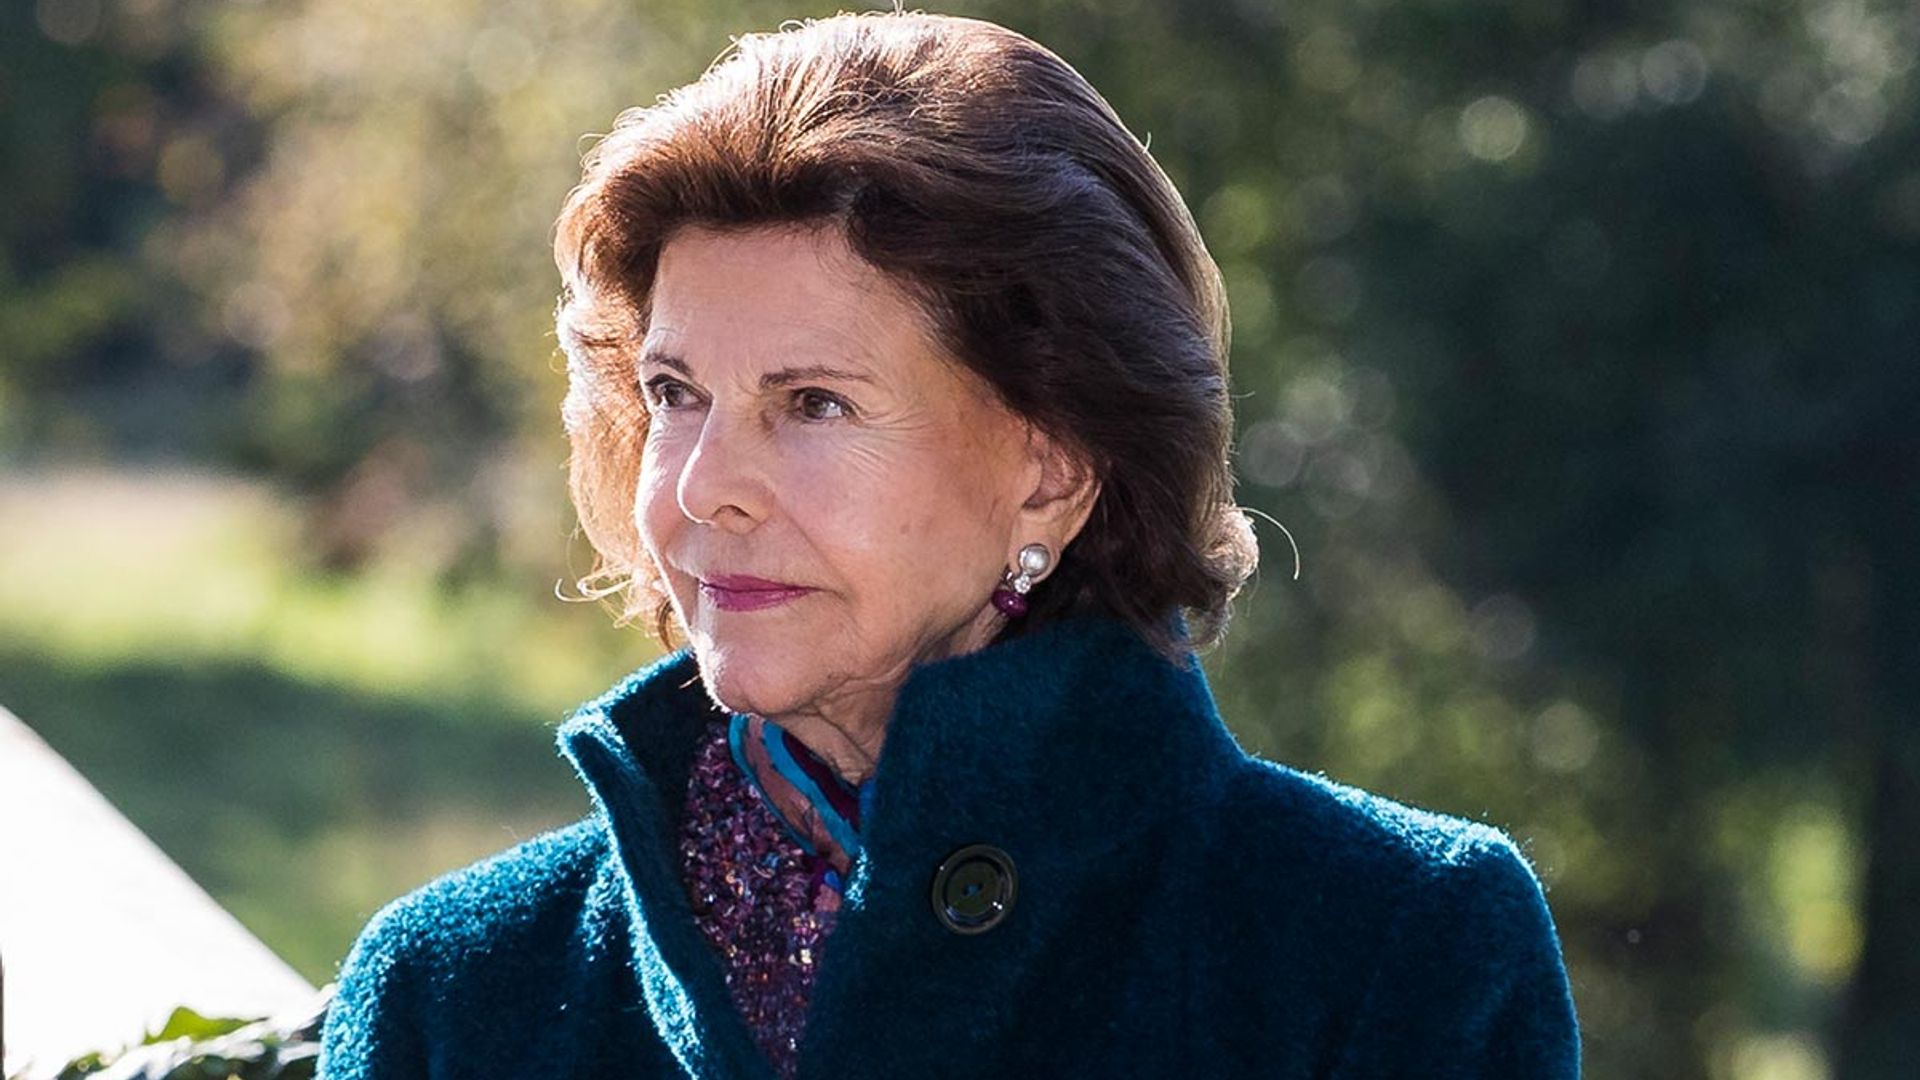 Queen Silvia of Sweden injured after accident at home